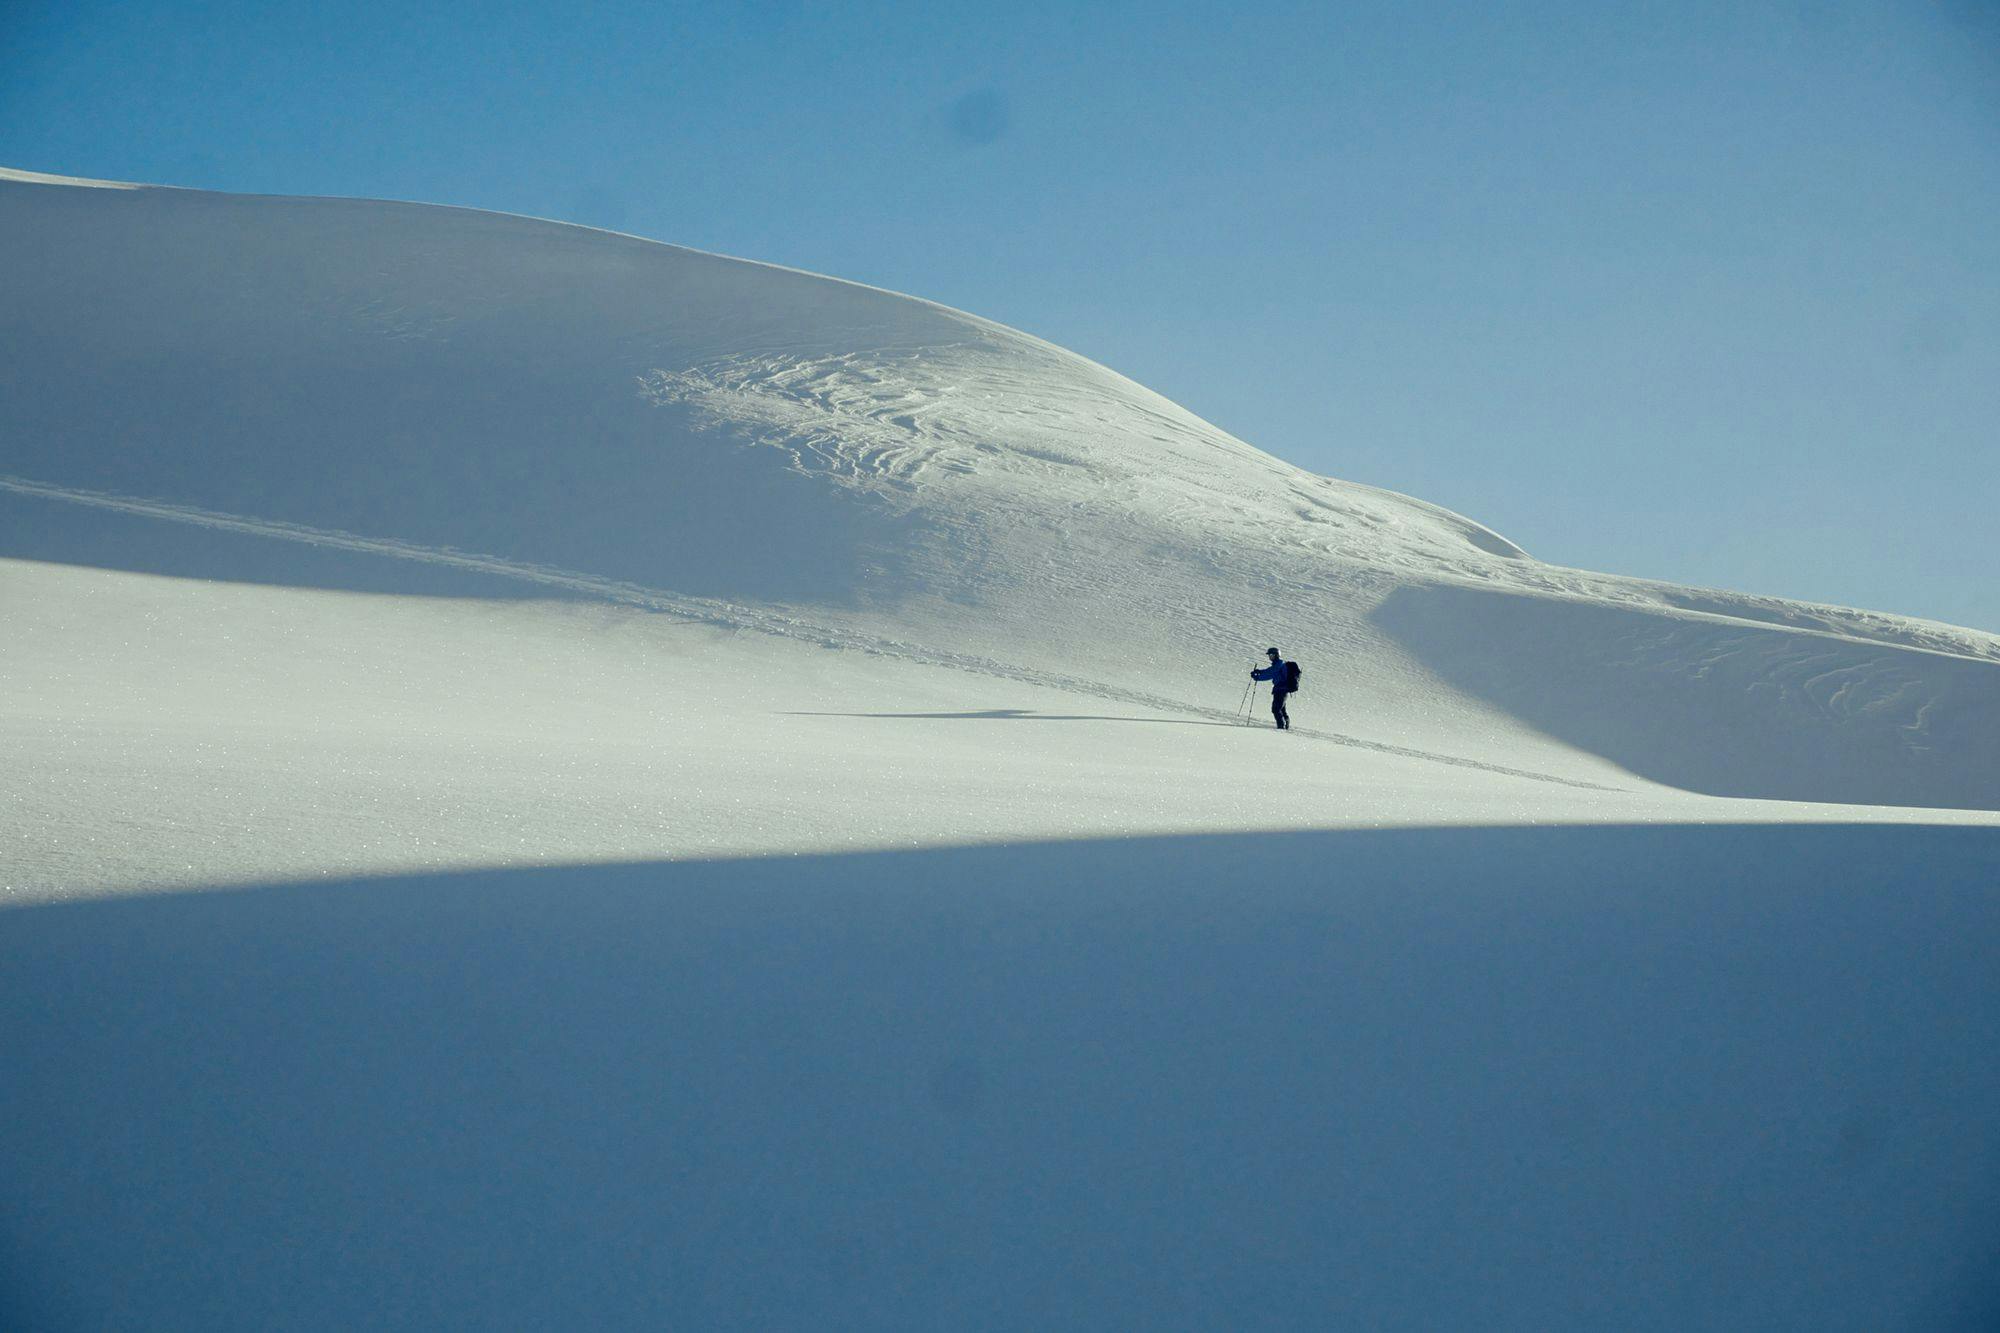 A skier crossing a blank white seciton of a mountain